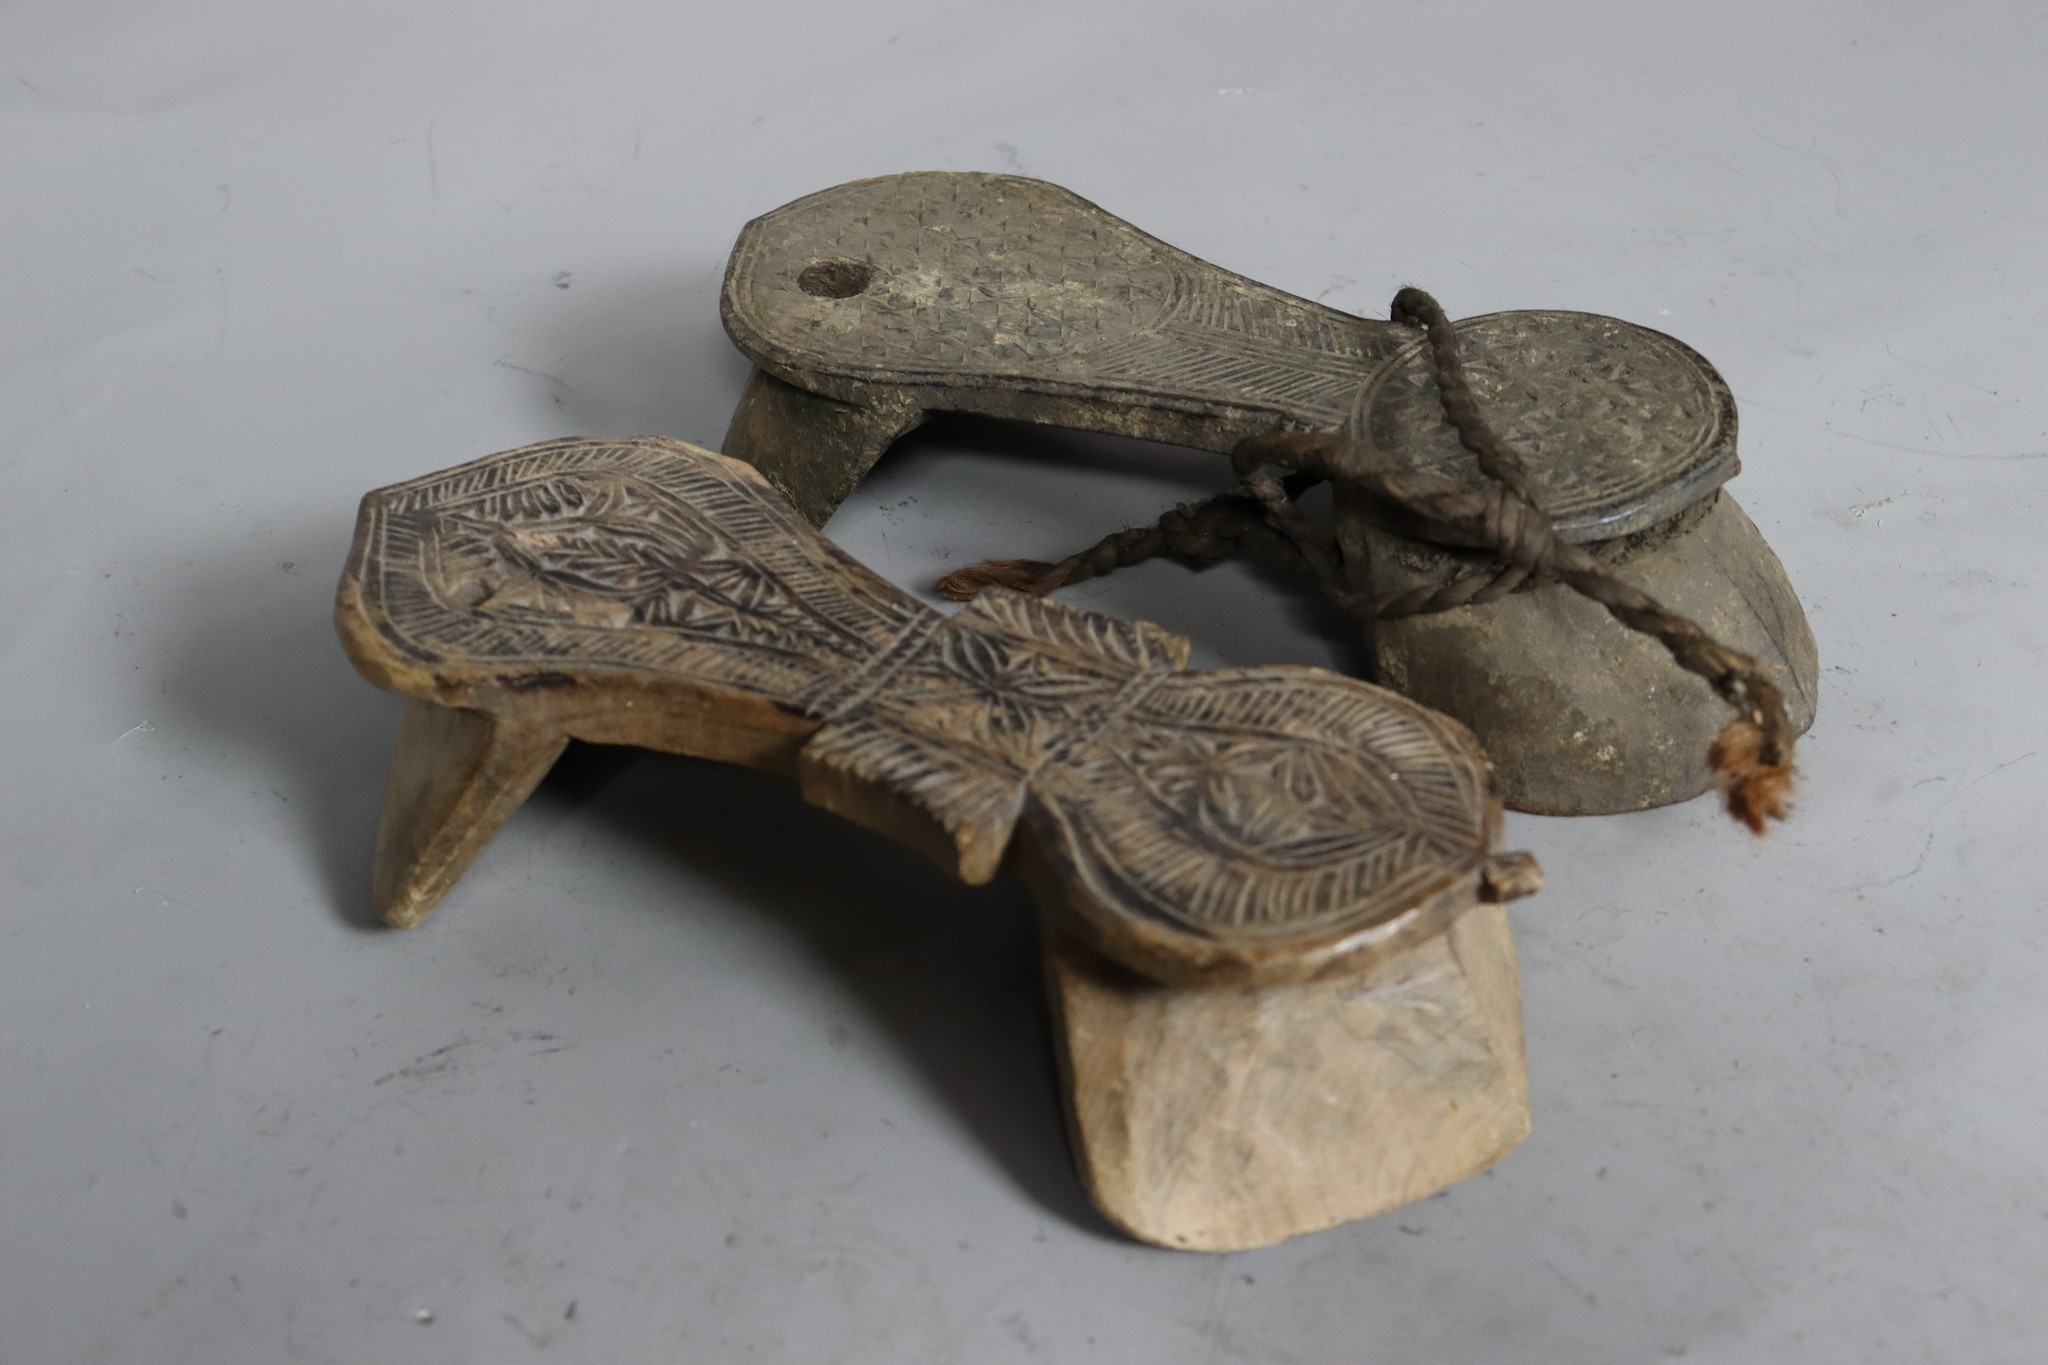 Antique 19th C Pakistan Swat Valley Handmade Wooden Carved  Sandal Nuristan Afghanistan Shoes No:A